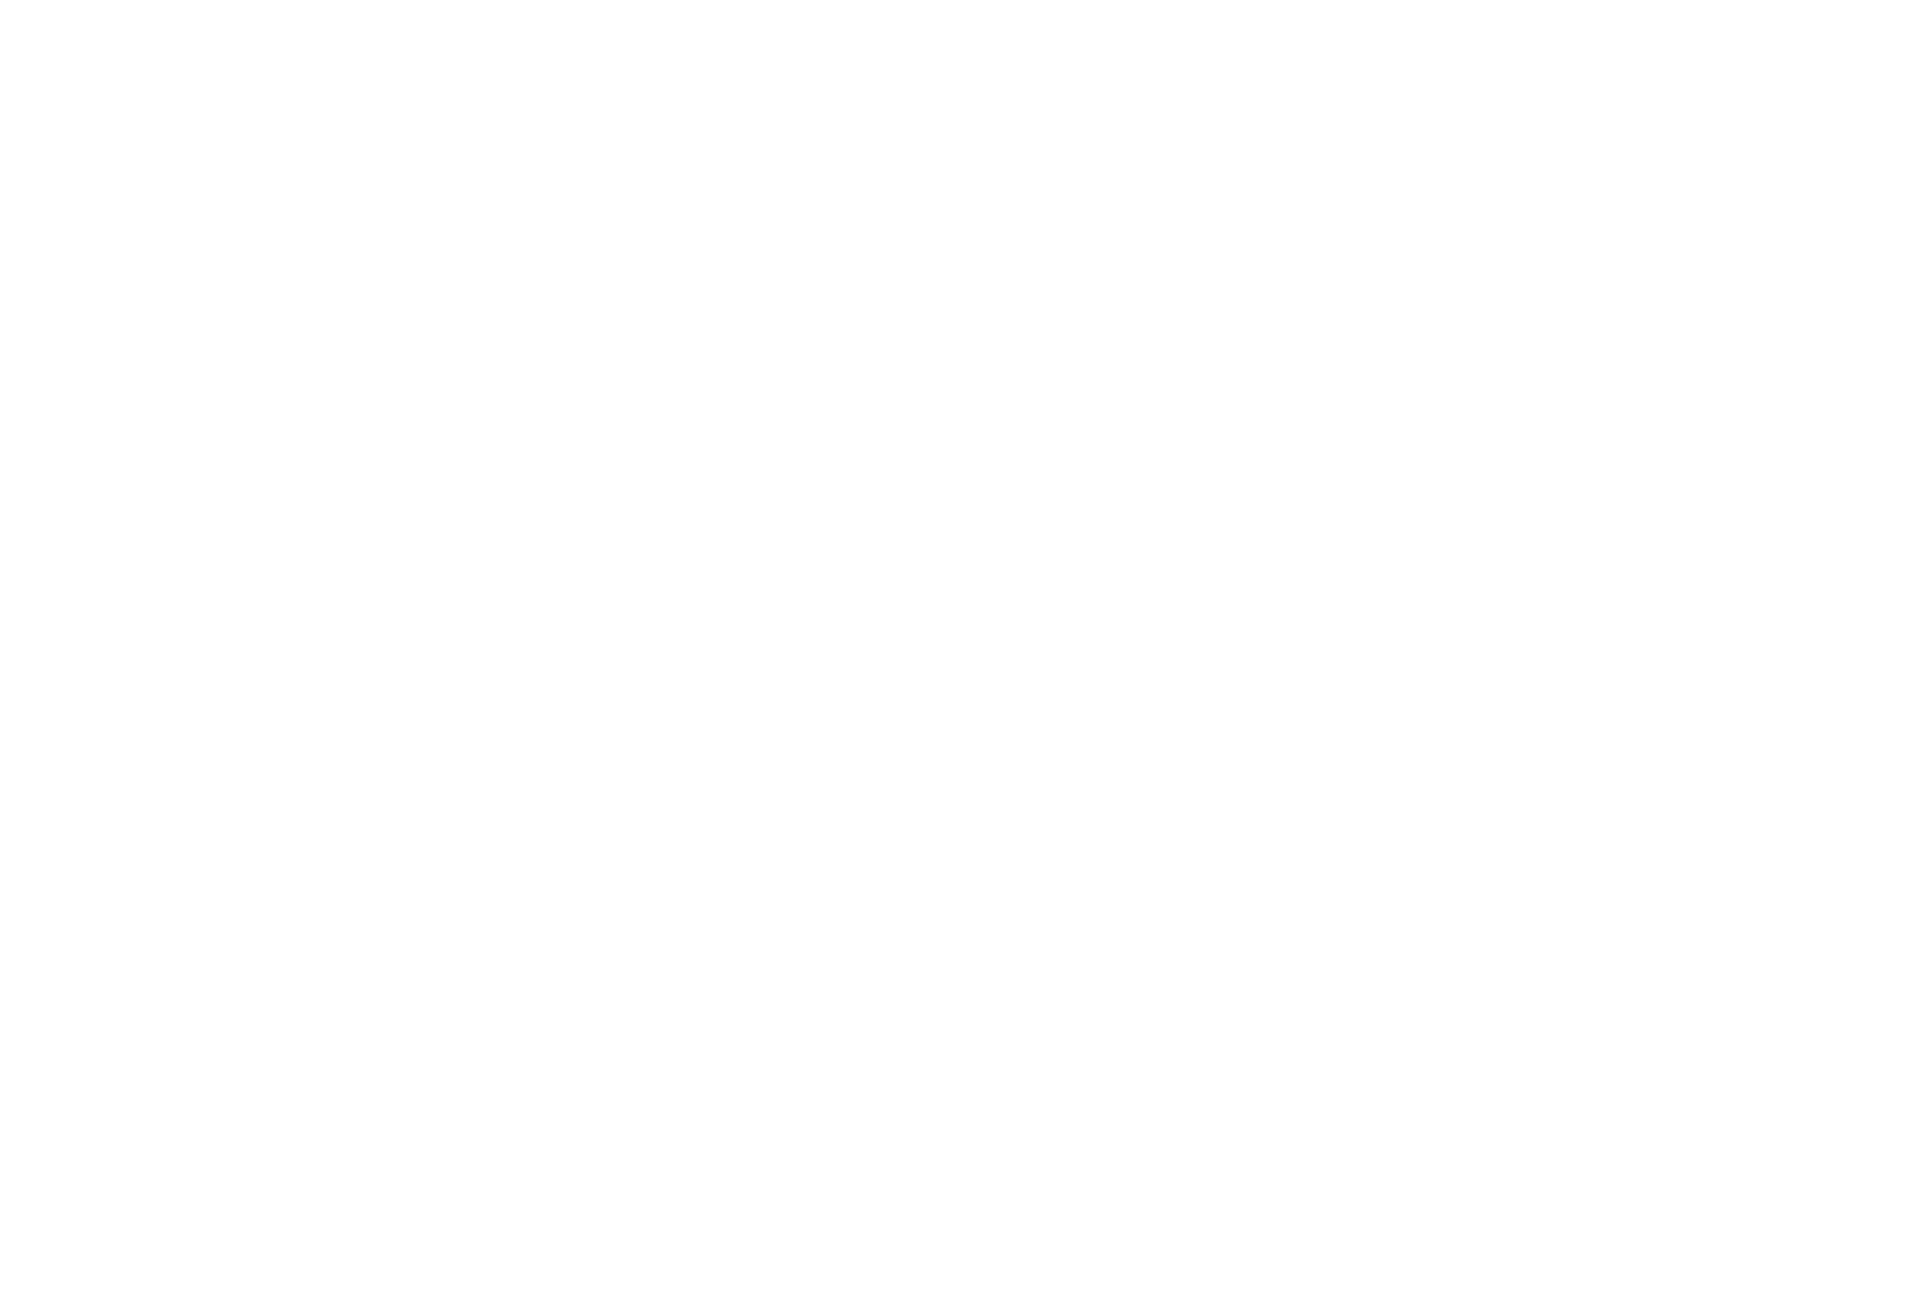 We are LSCFT